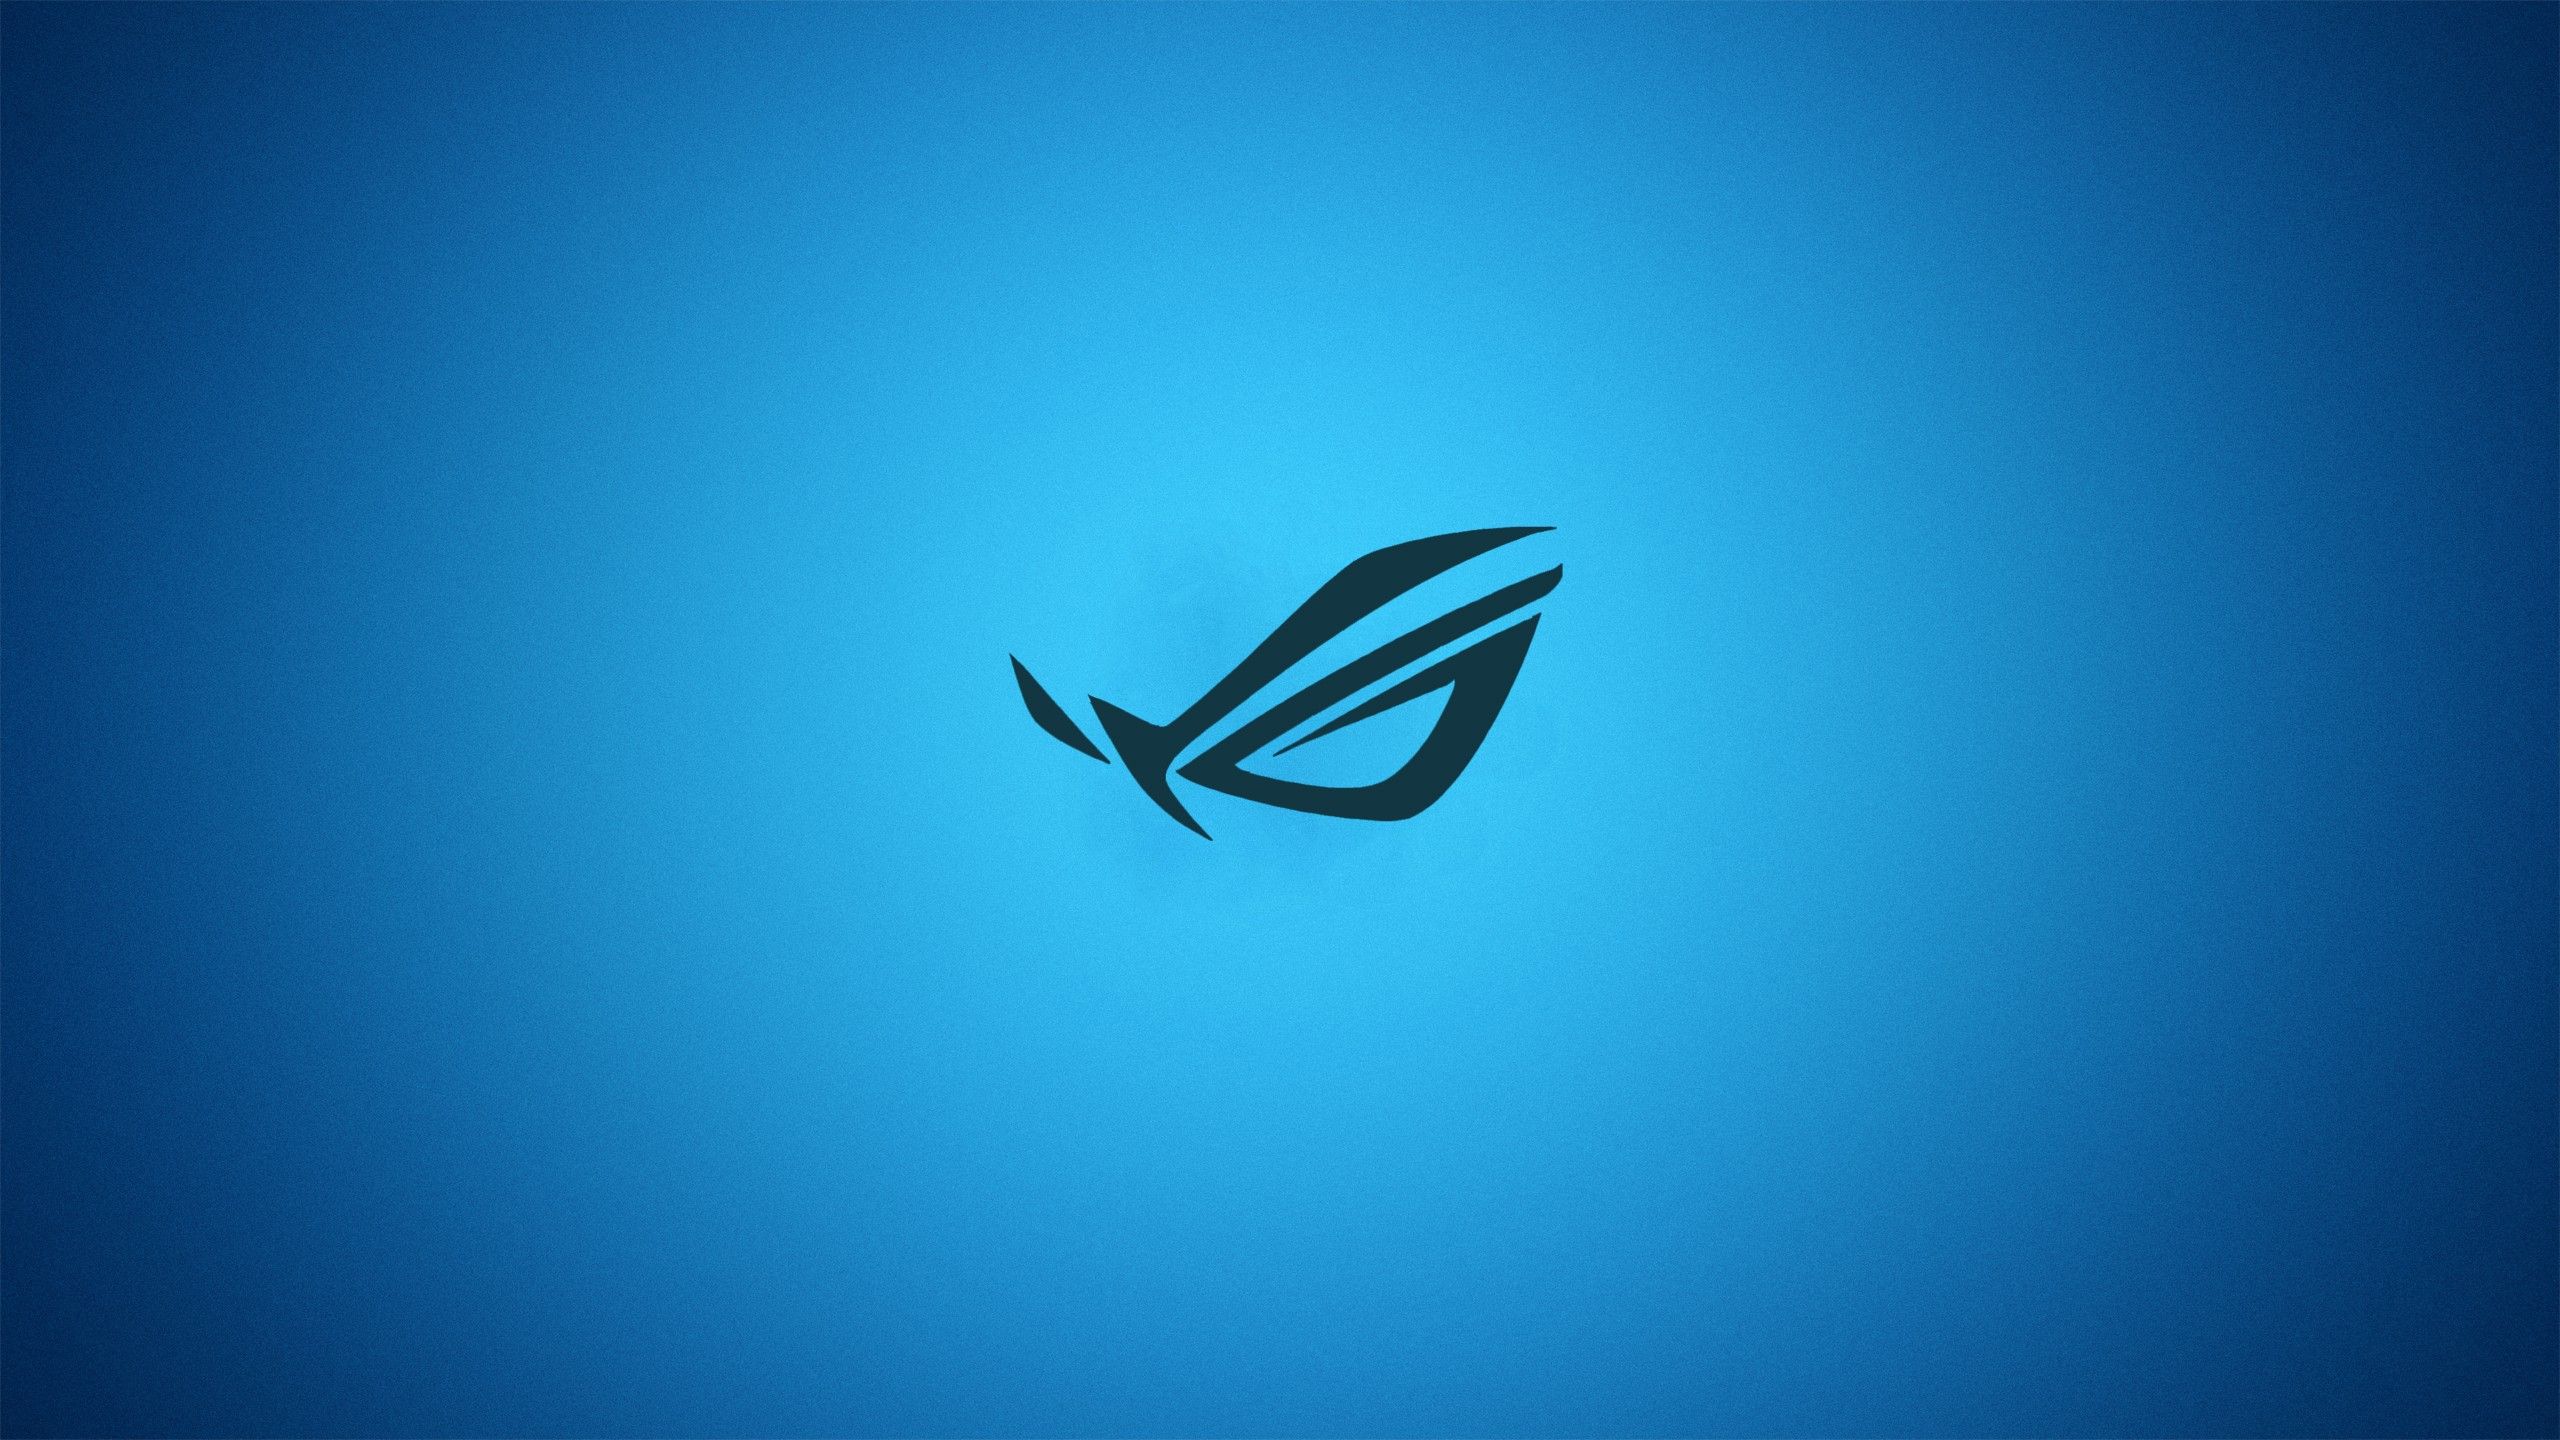 Asus Blue Wallpaper Free Asus Blue Background